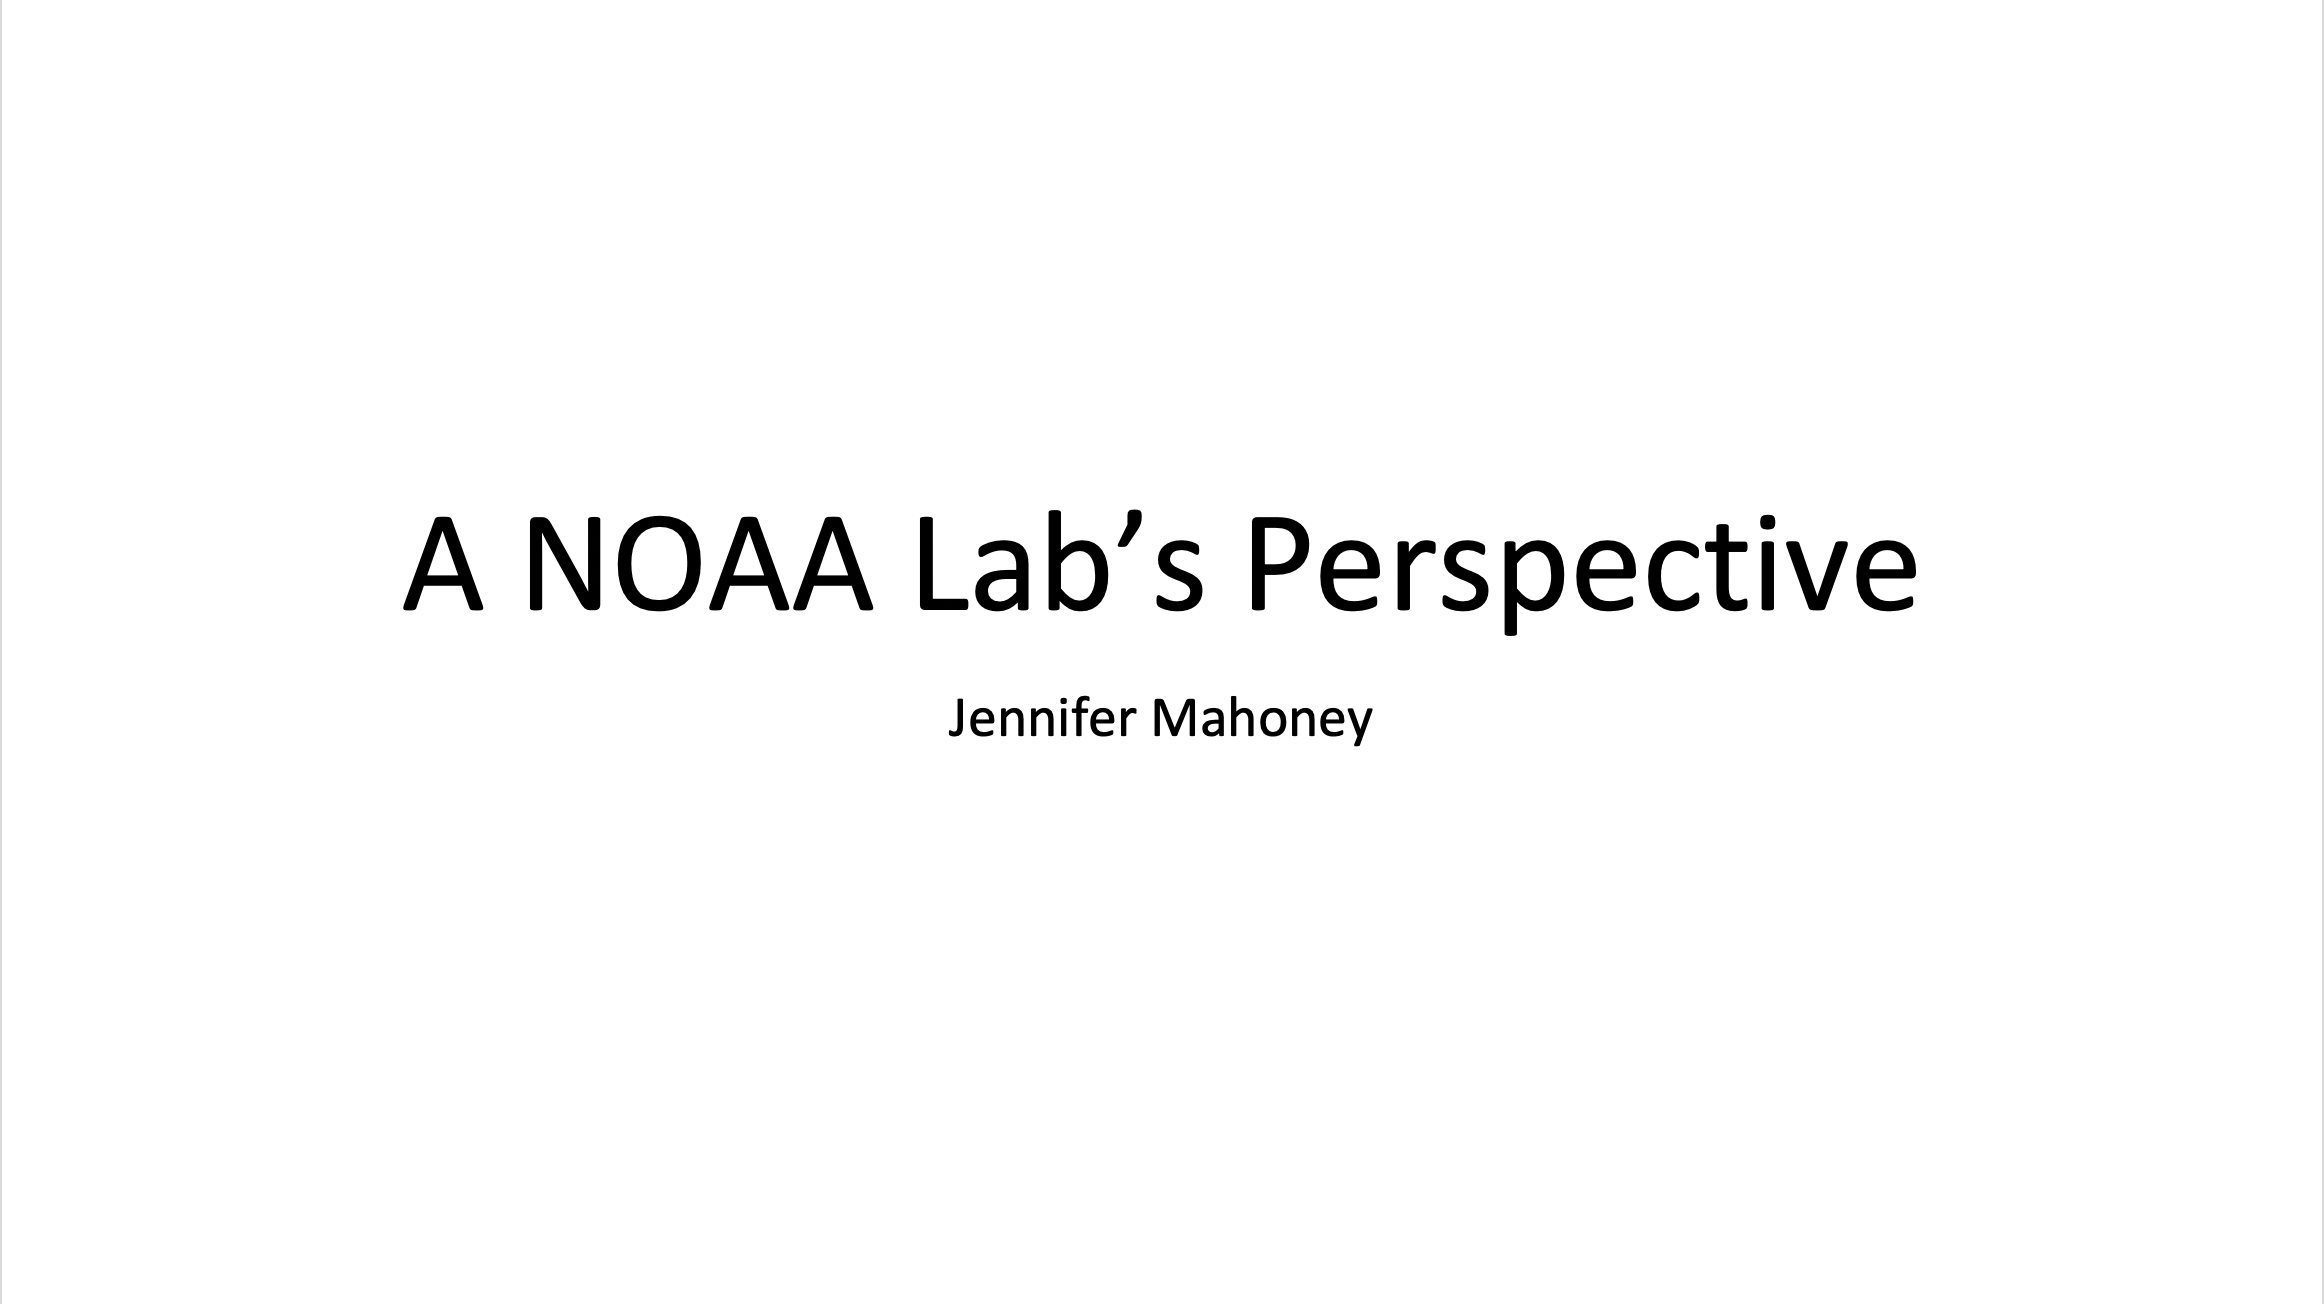 A NOAA Lab’s Perspective